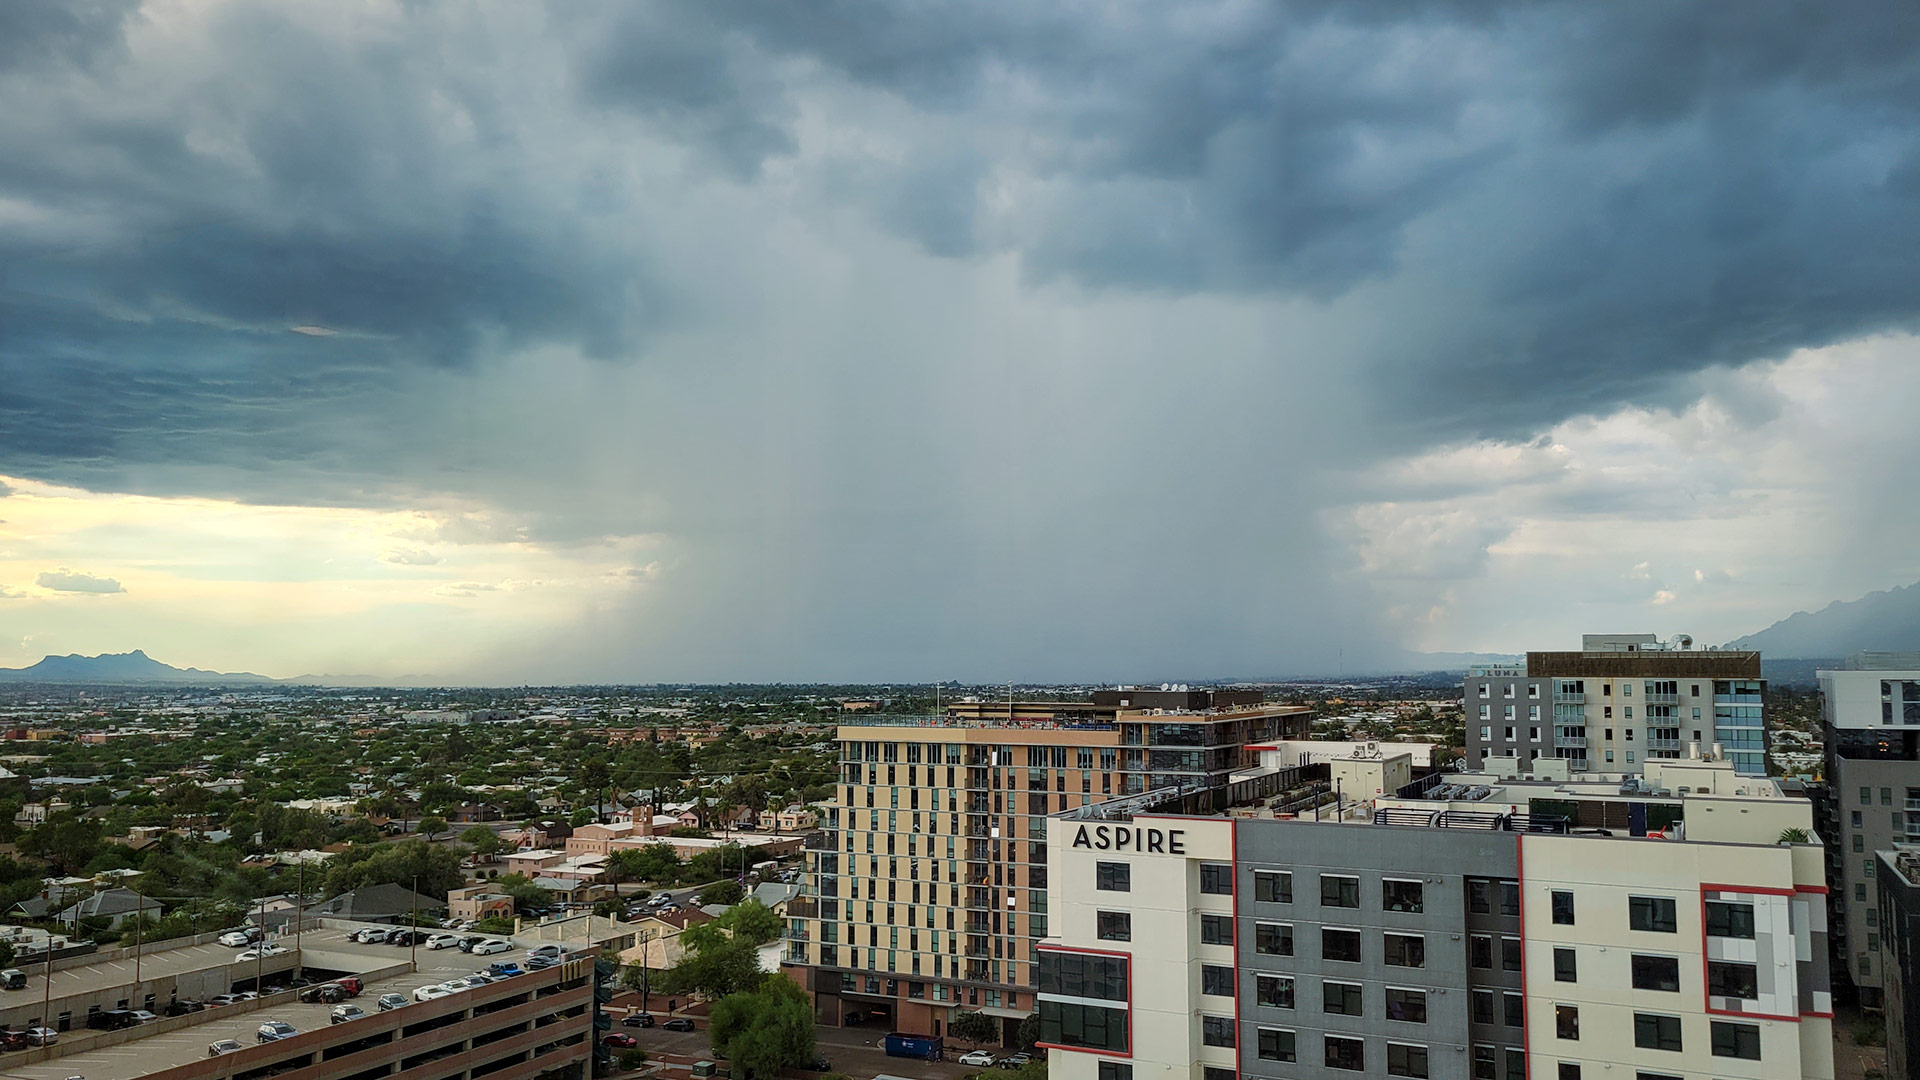 A monsoon storm drops localized, heavy rainfall over northwest Tucson, Marana, and Oro Valley. From August 2022.